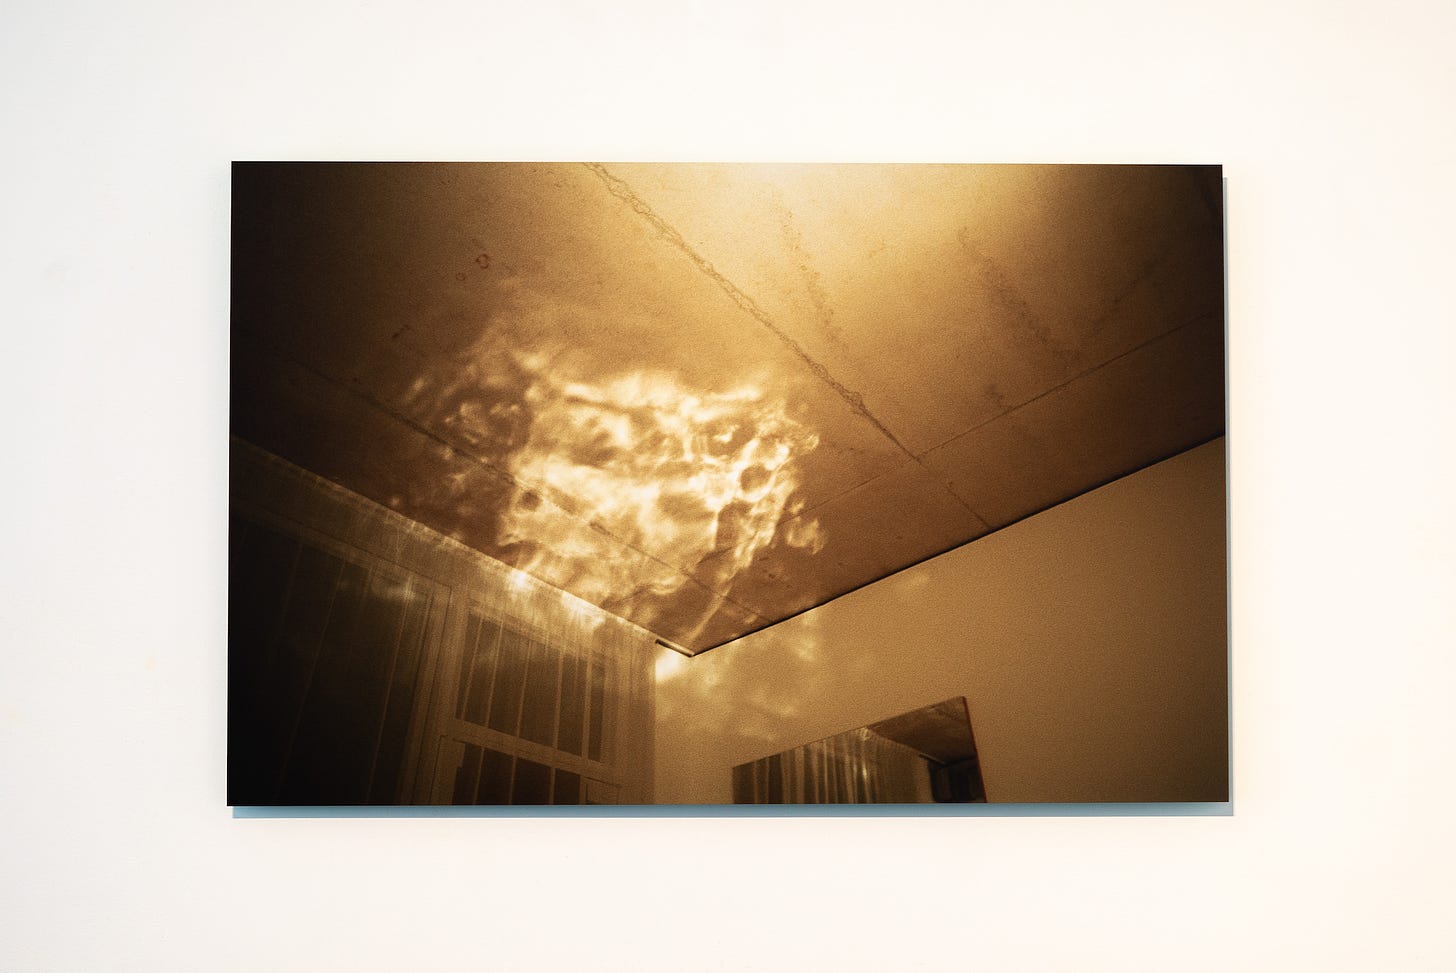 A horizontal rectangular image of light filtered through some sort of prism almost, diffused and amorphous, it dances upon the corner of a ceiling